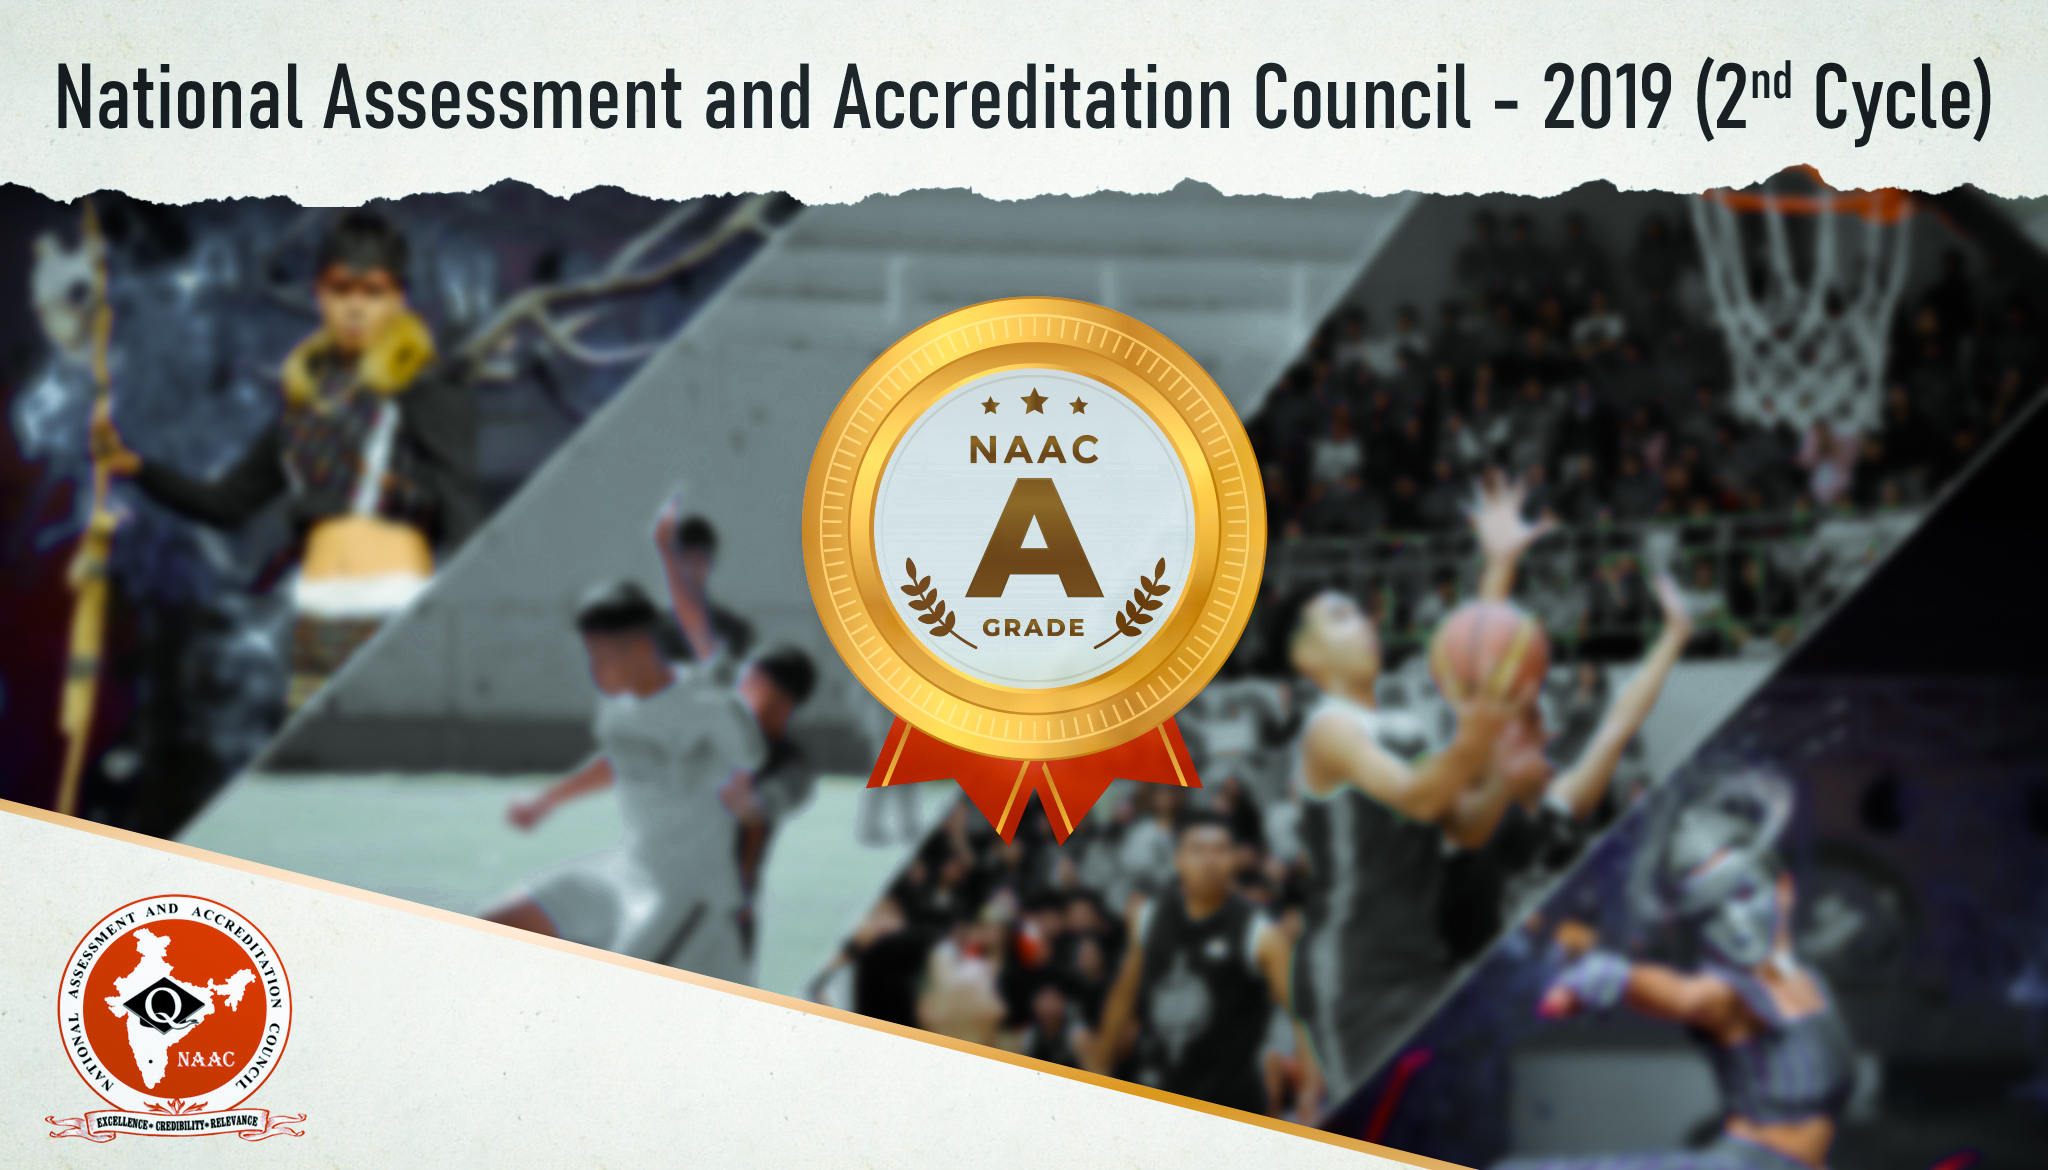 Accredited 'A' Grade by NAAC